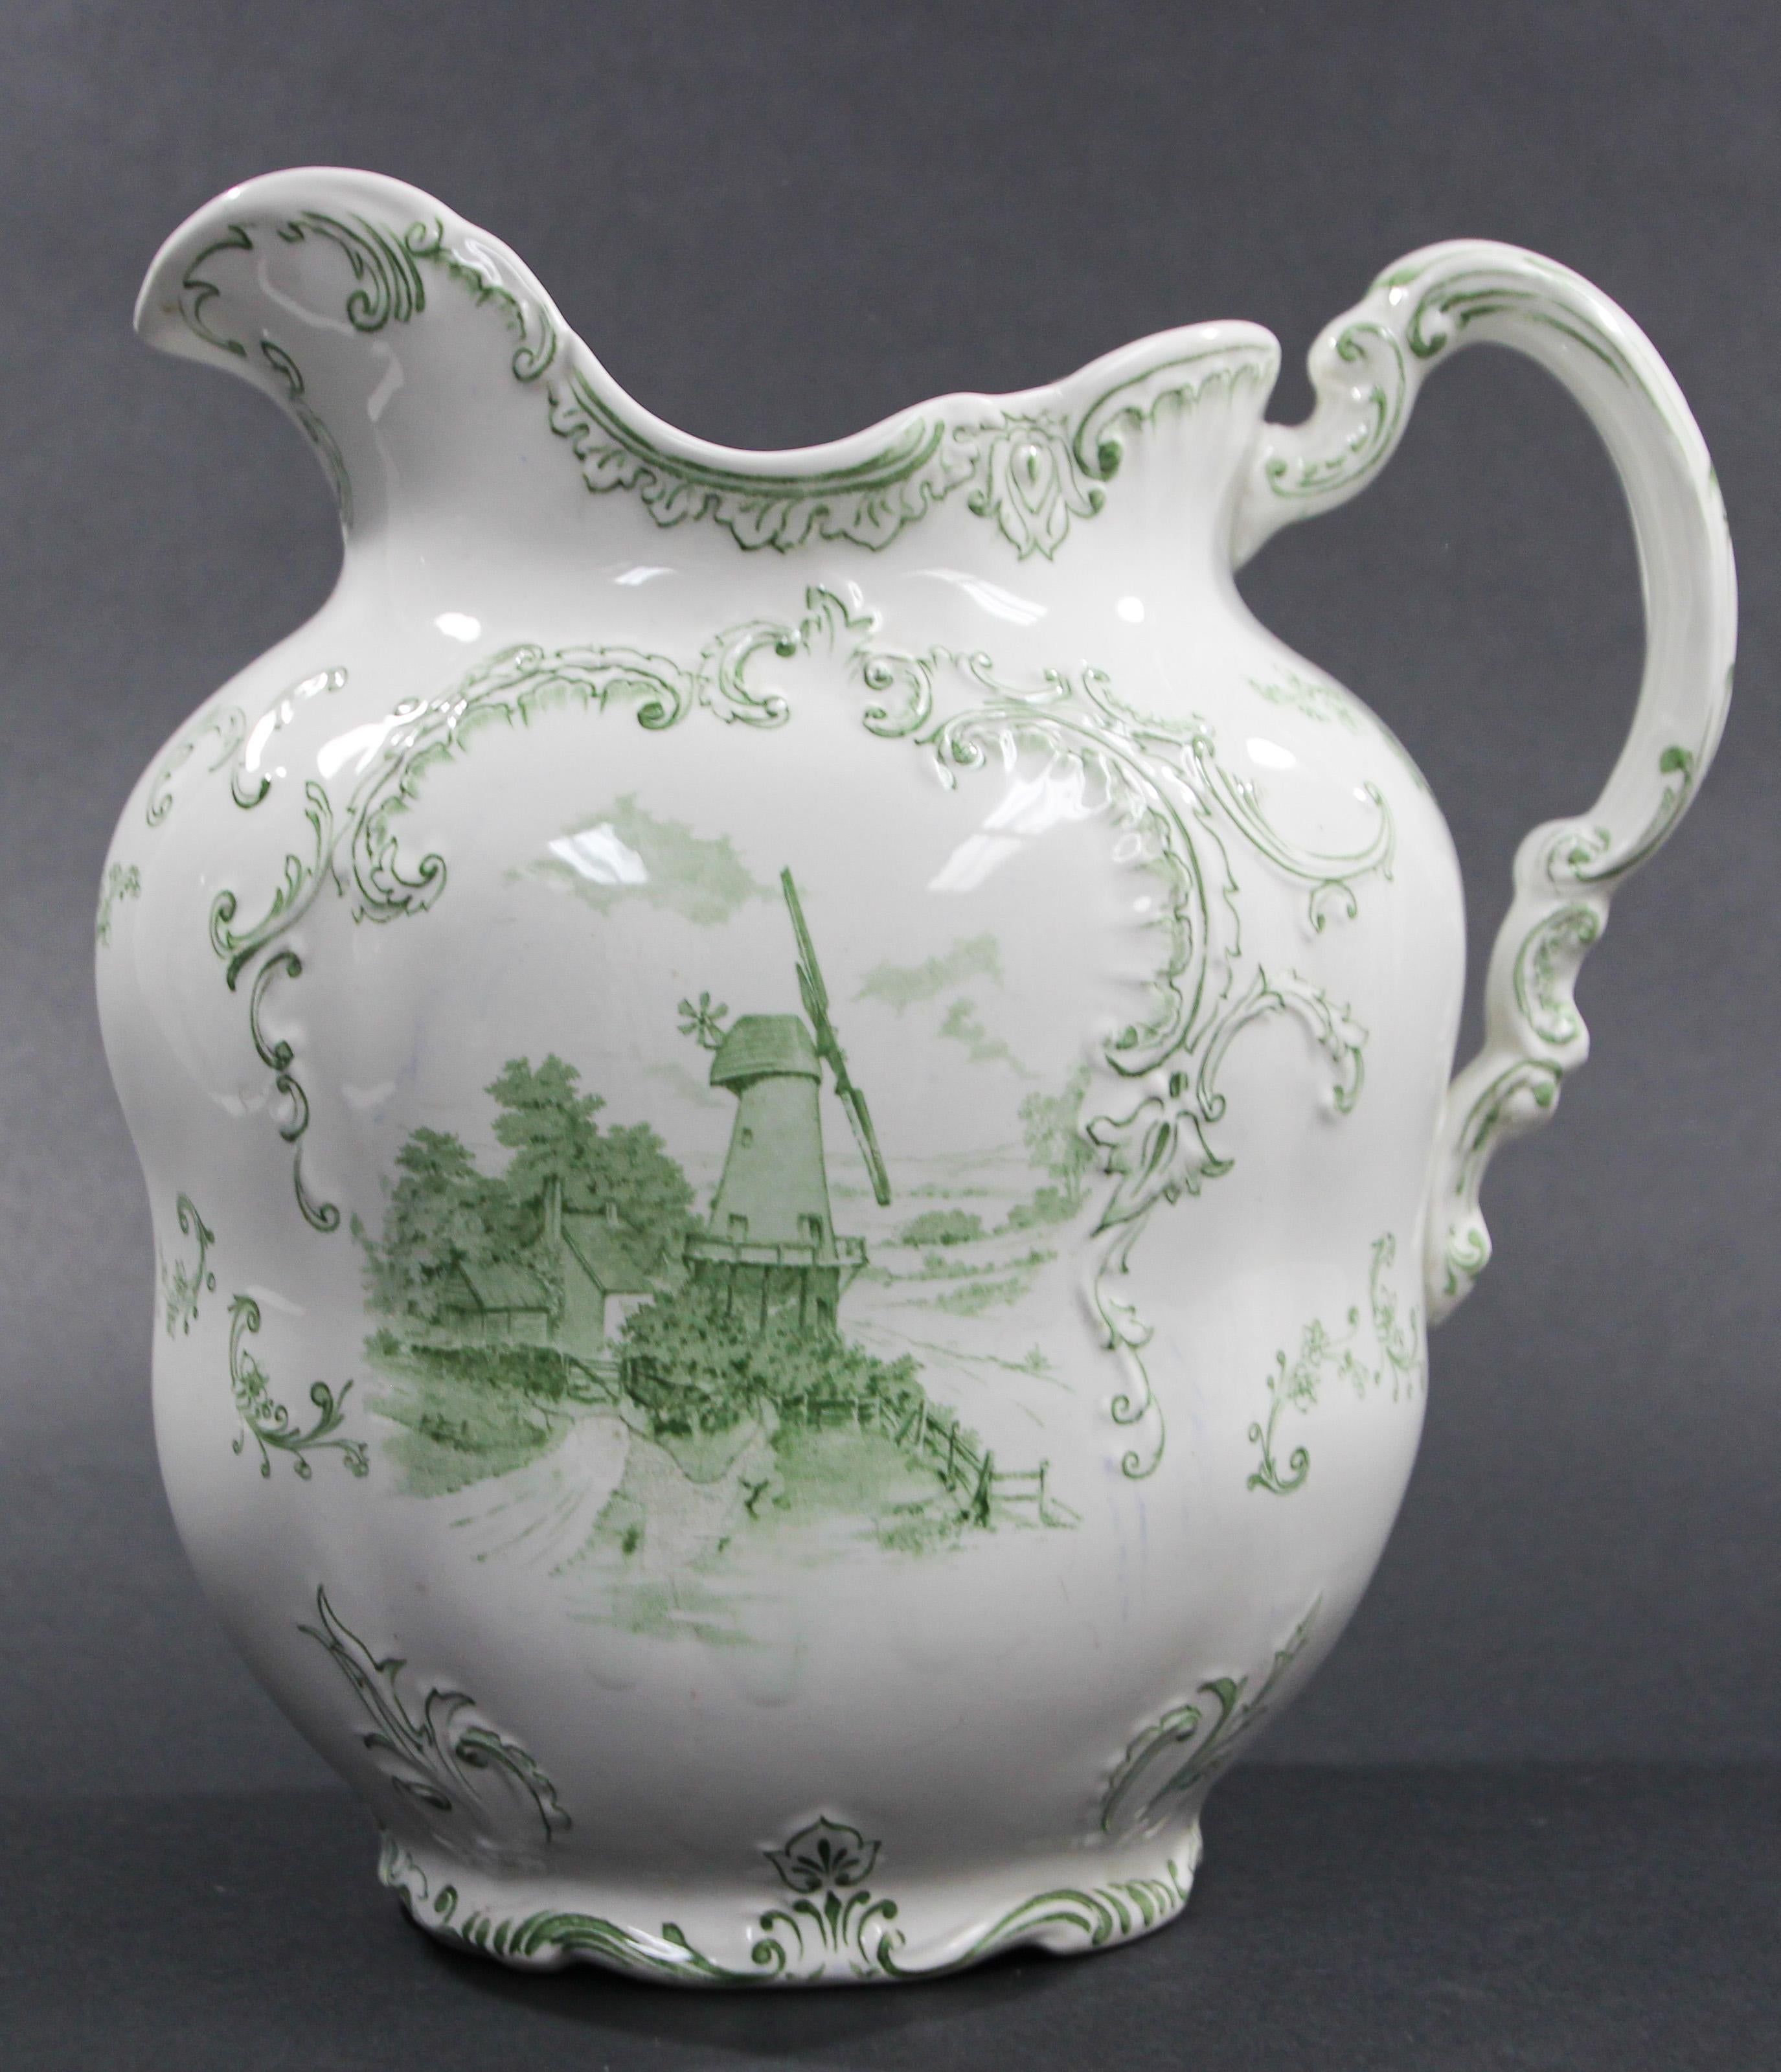 Stunning Delft green and white pitcher in very good condition.
This is a beautiful and hard to find large water pitcher.
The painting depicts a boat on one side and on the other side a country scene.
It is beautiful and really stands out in a